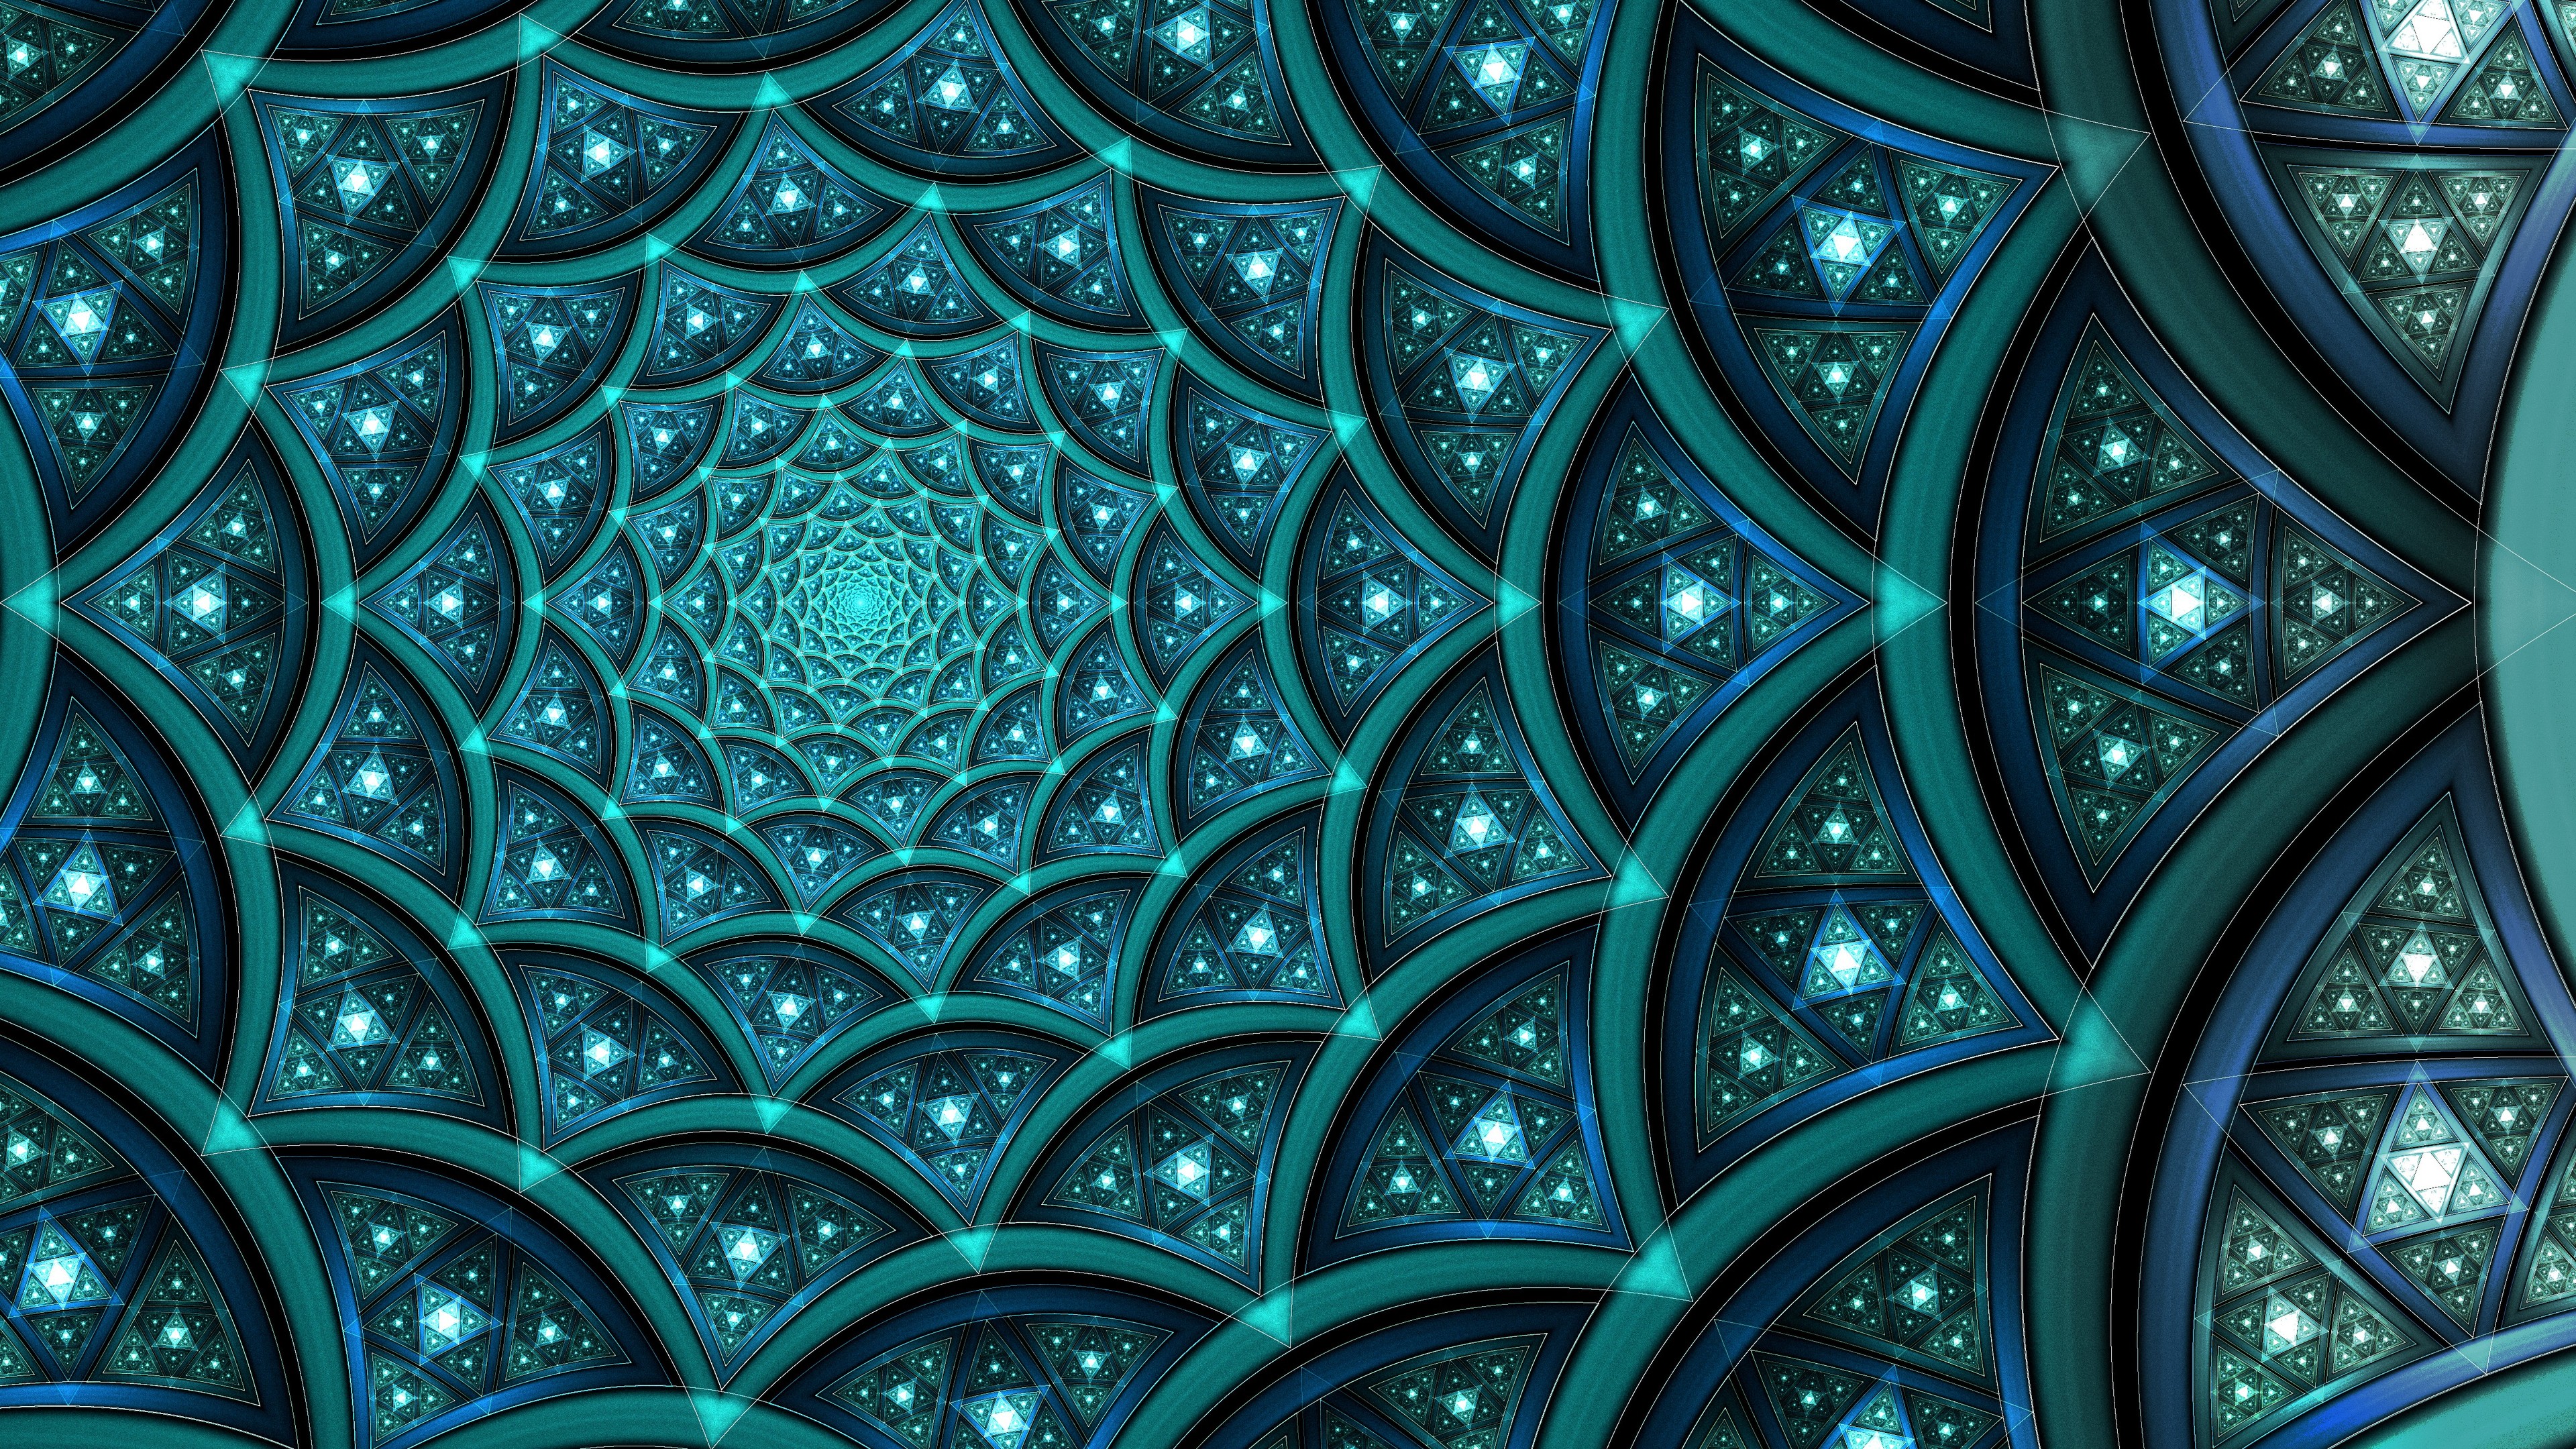 Fractal 4K wallpapers for your desktop or mobile screen free and easy to  download